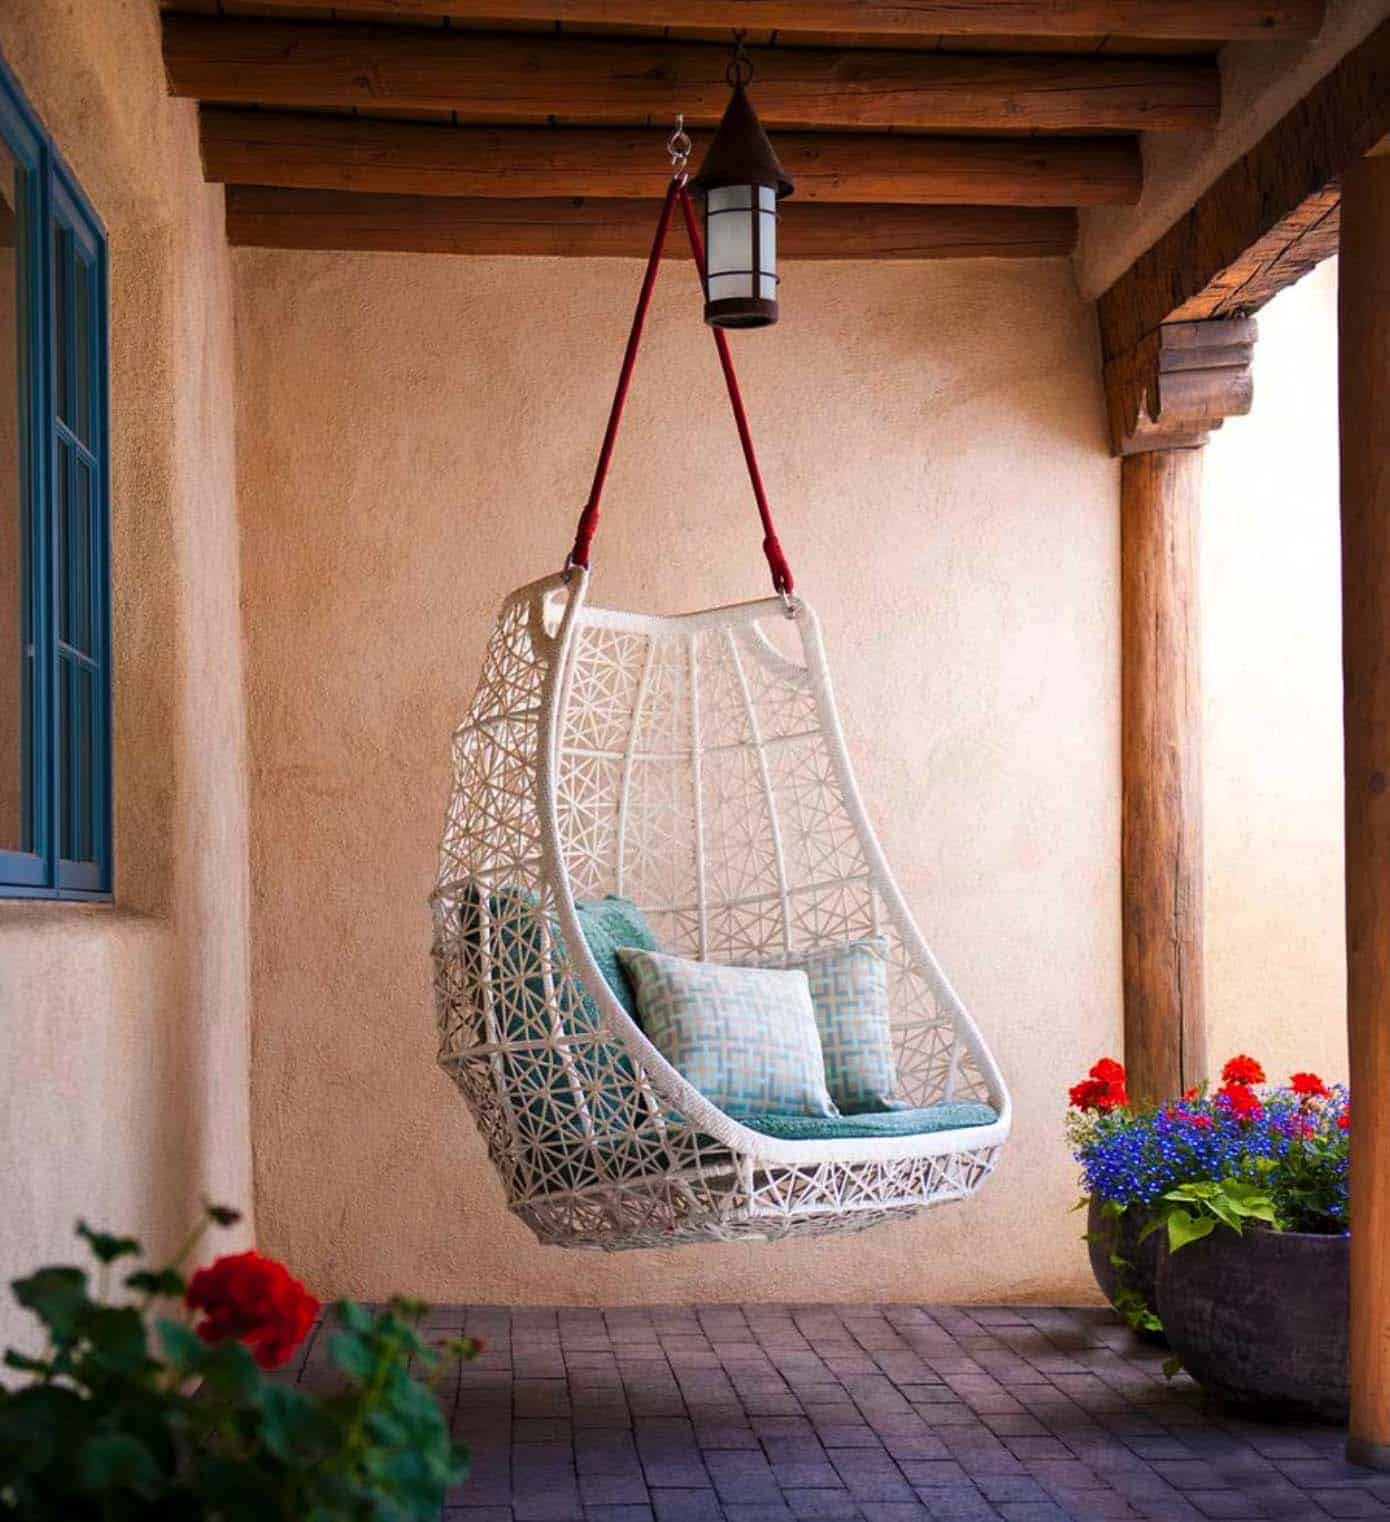 Backyard Swing Bed
 27 Absolutely fabulous outdoor swing beds for summertime